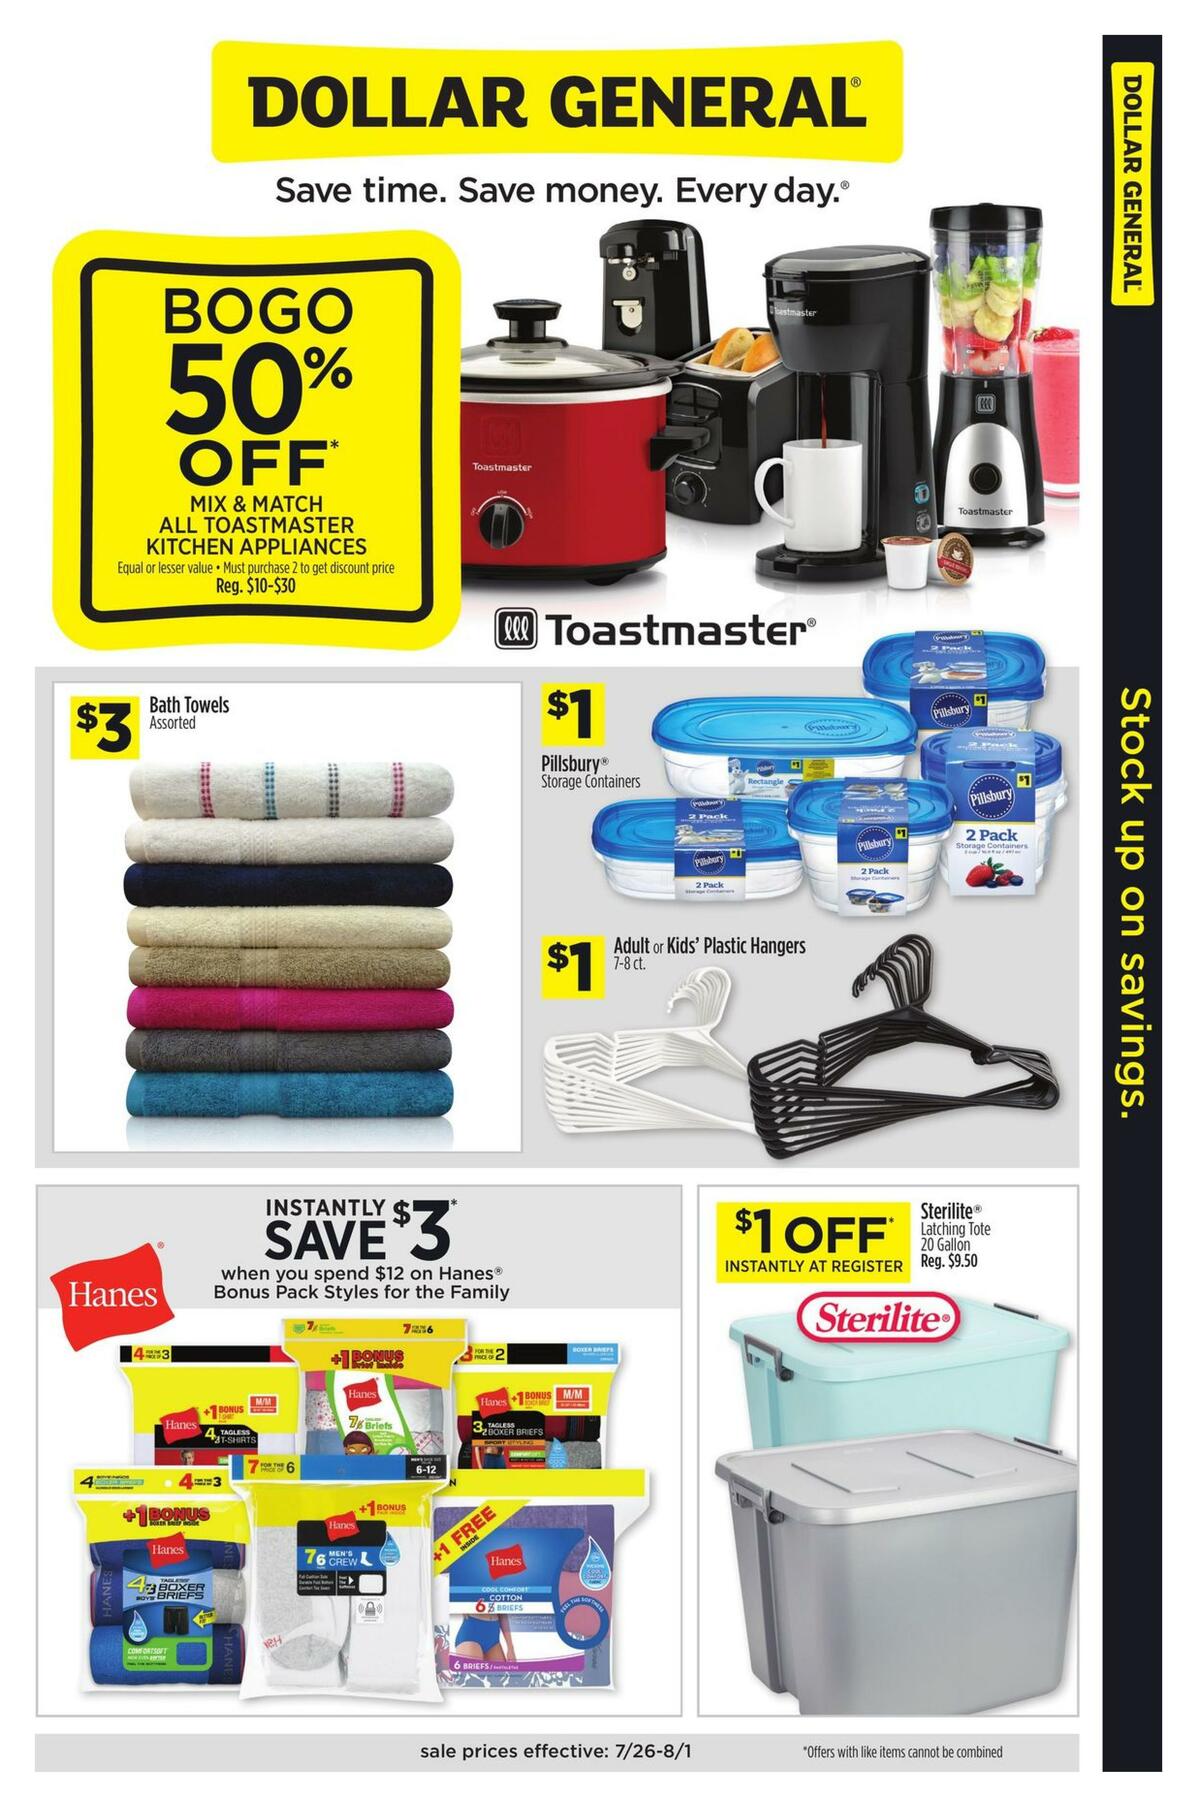 Dollar General Deals for the whole house Weekly Ad from July 26